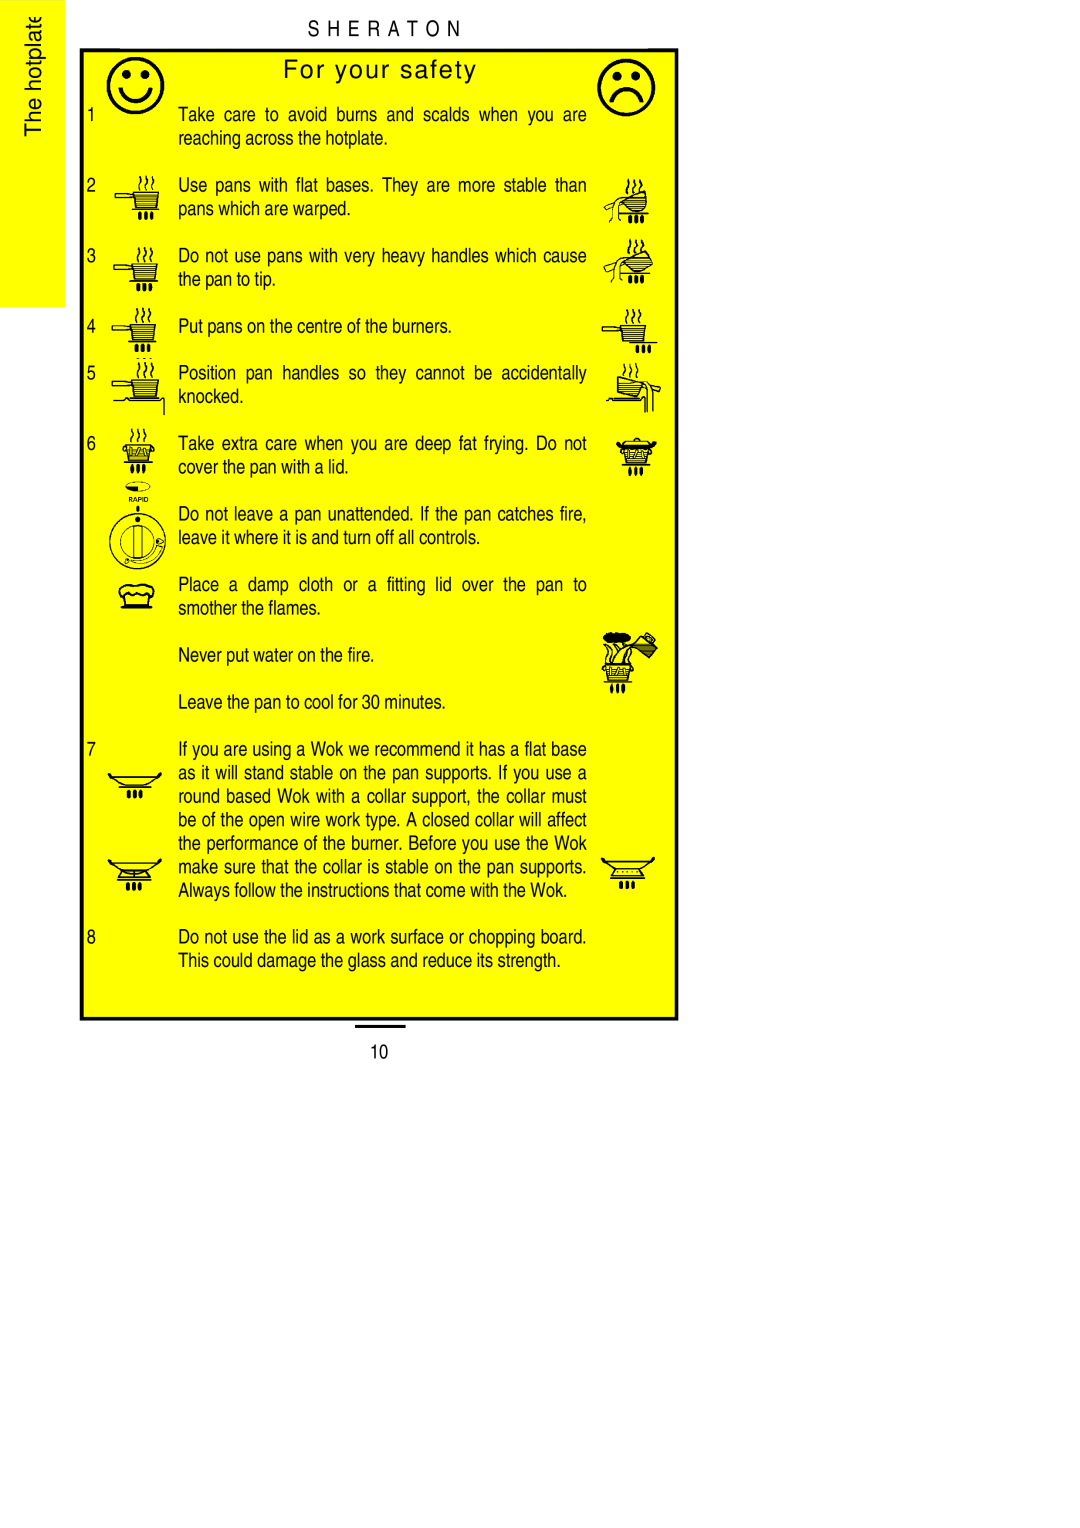 Parkinson Cowan U02059 installation instructions For your safety, The hotplate, S H E R A T O N 